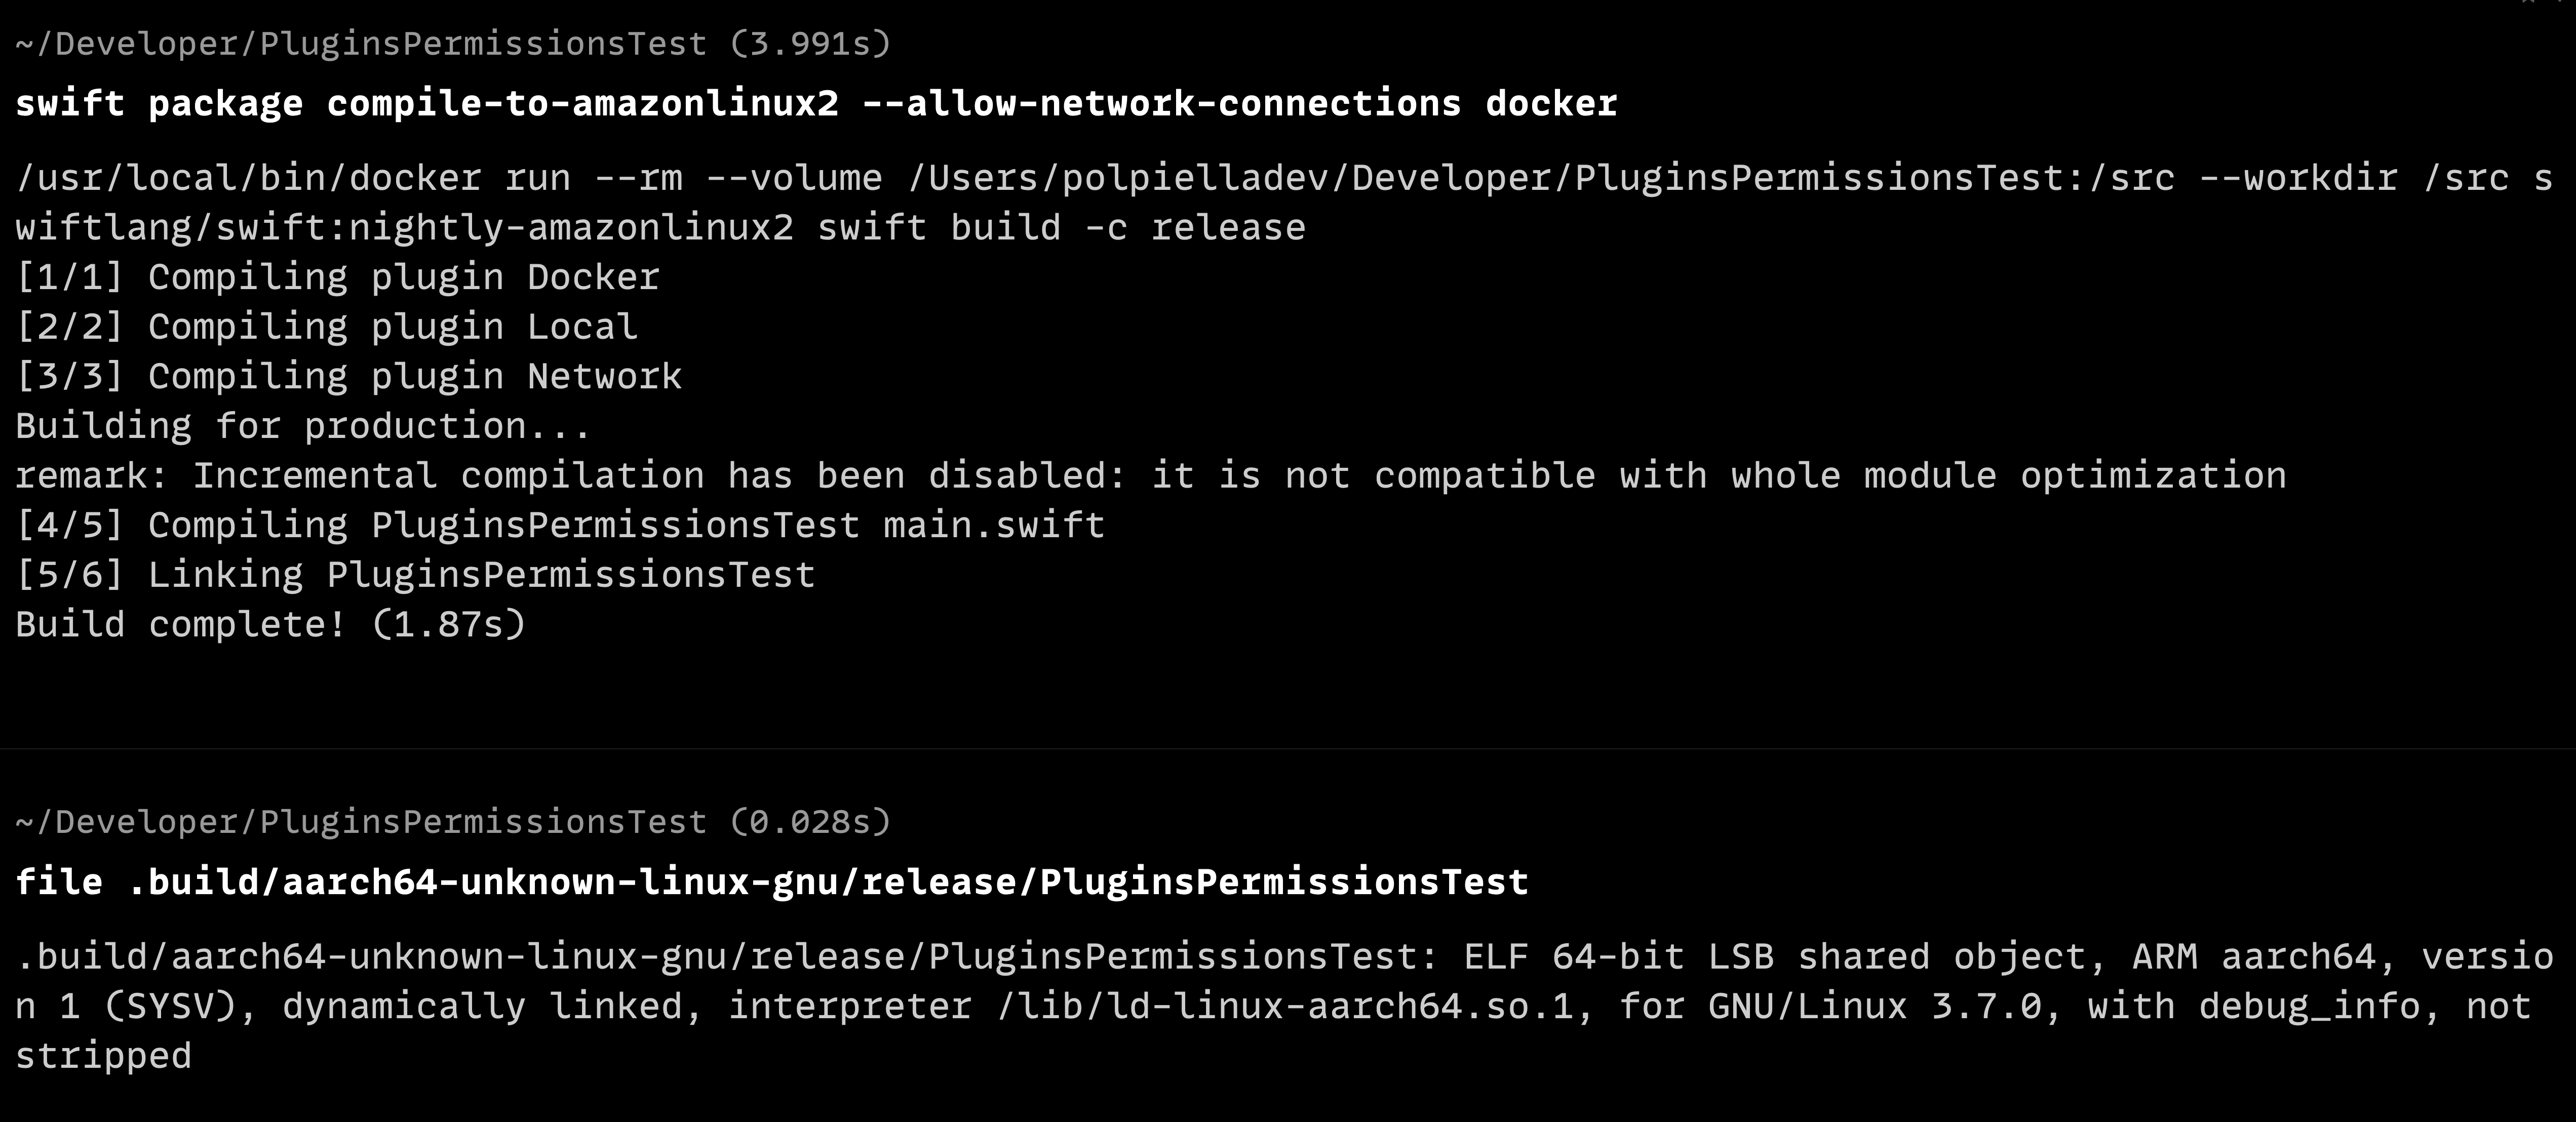 The terminal output for the docker command plugin